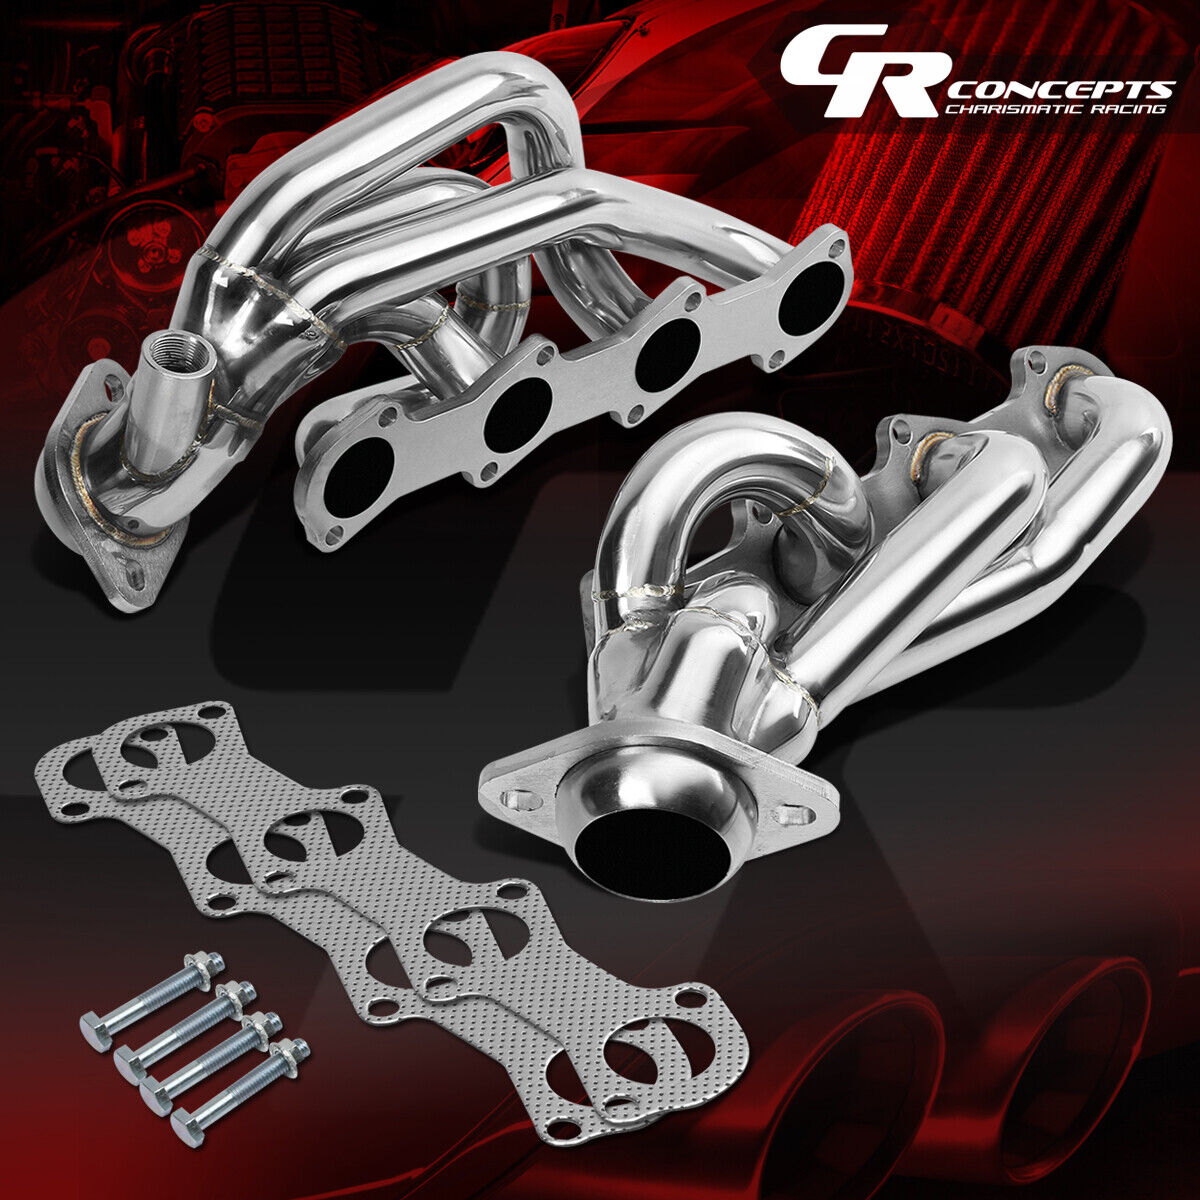 FOR 97-03 F150/F250/EXPEDITION 5.4 V8 STAINLESS EXHAUST MANIFOLD HEADER+GASKET